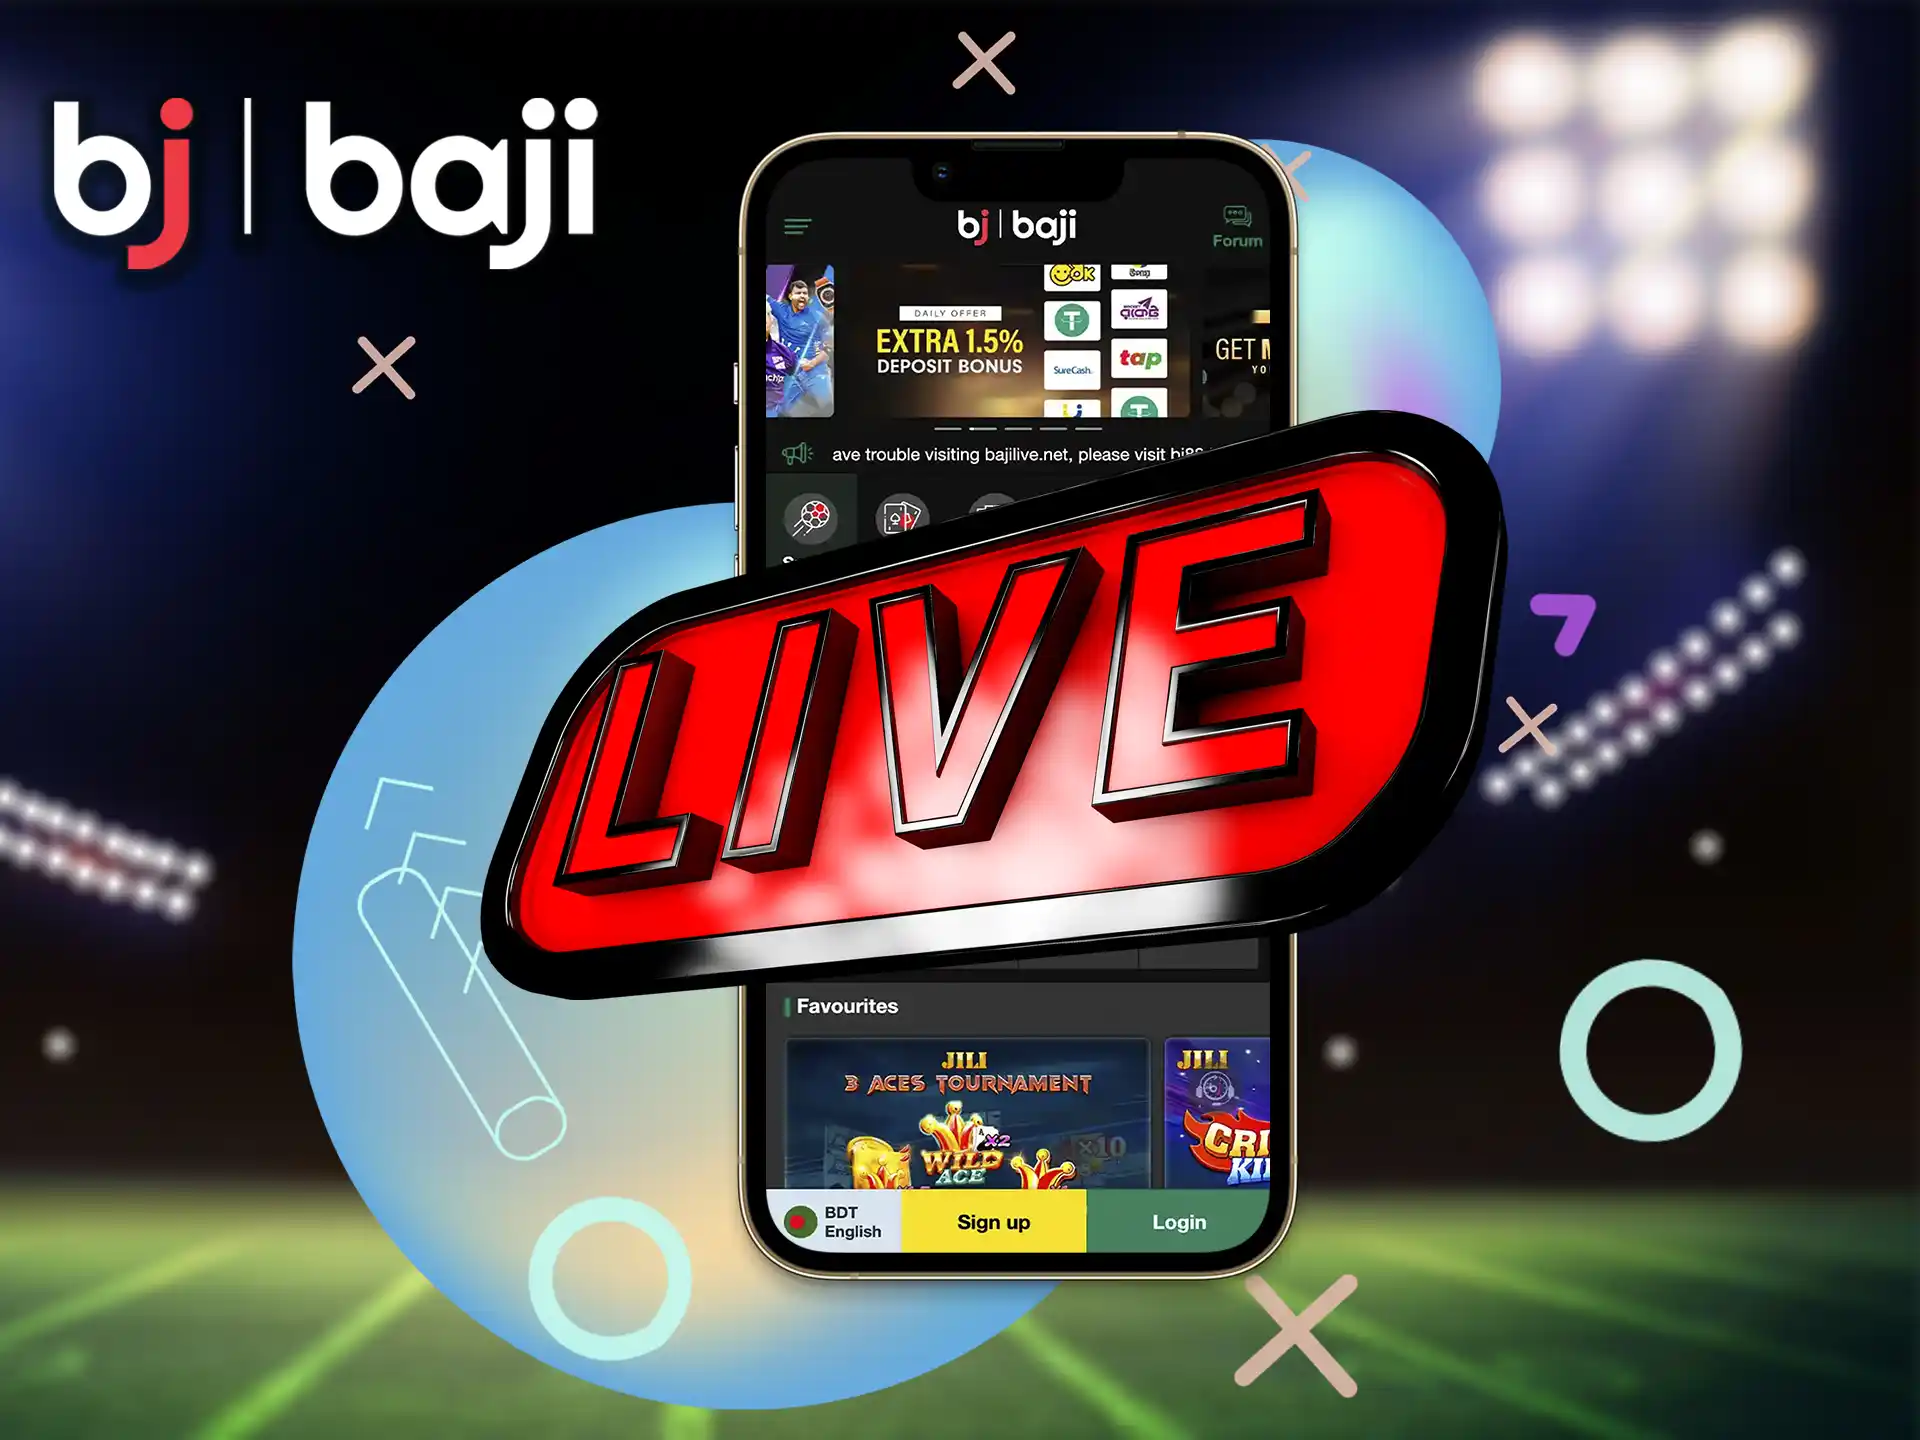 If you are not new to betting and have a lot of experience in sports, this section of Baji will help you have a good time.